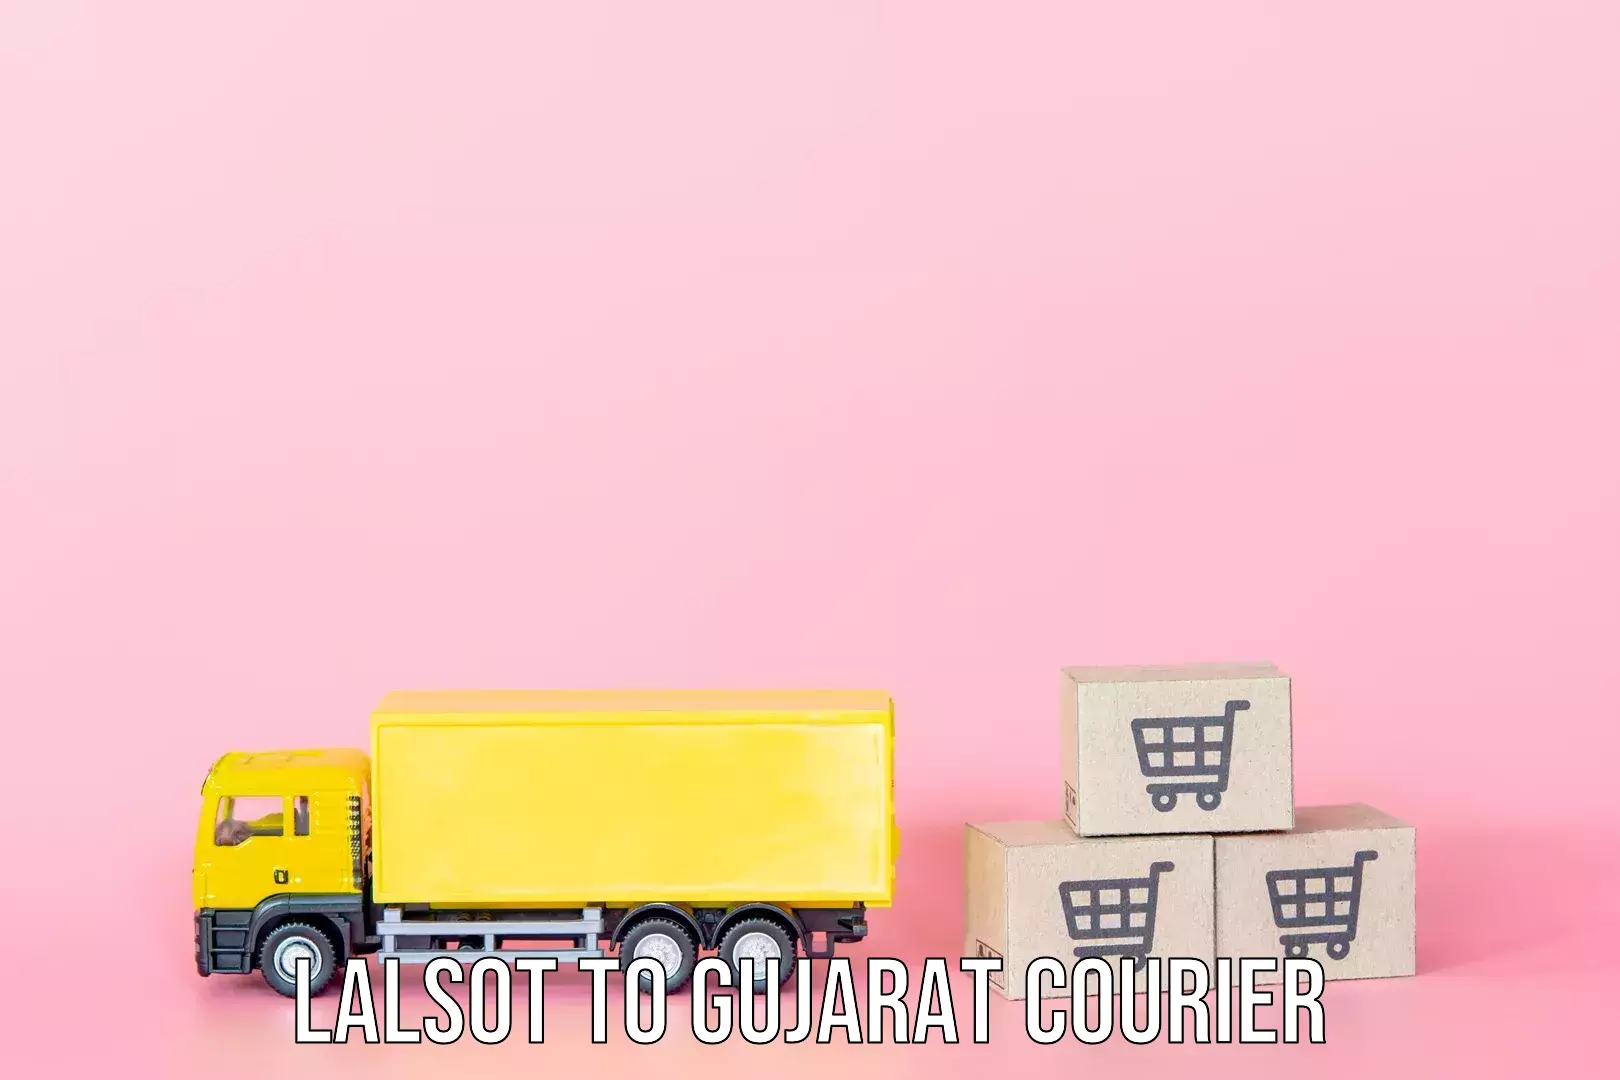 Luggage delivery optimization Lalsot to Rajkot